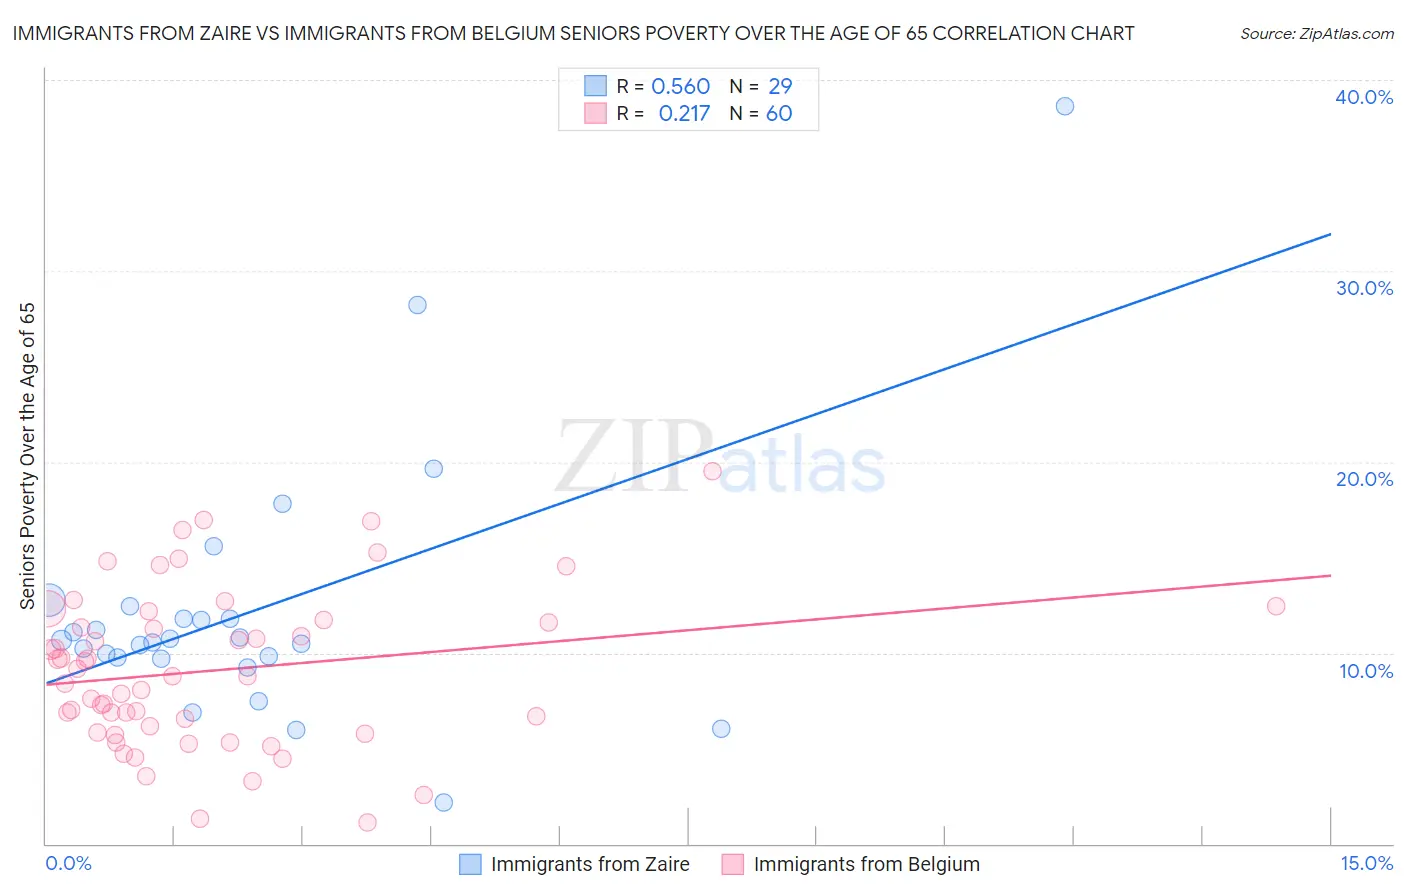 Immigrants from Zaire vs Immigrants from Belgium Seniors Poverty Over the Age of 65